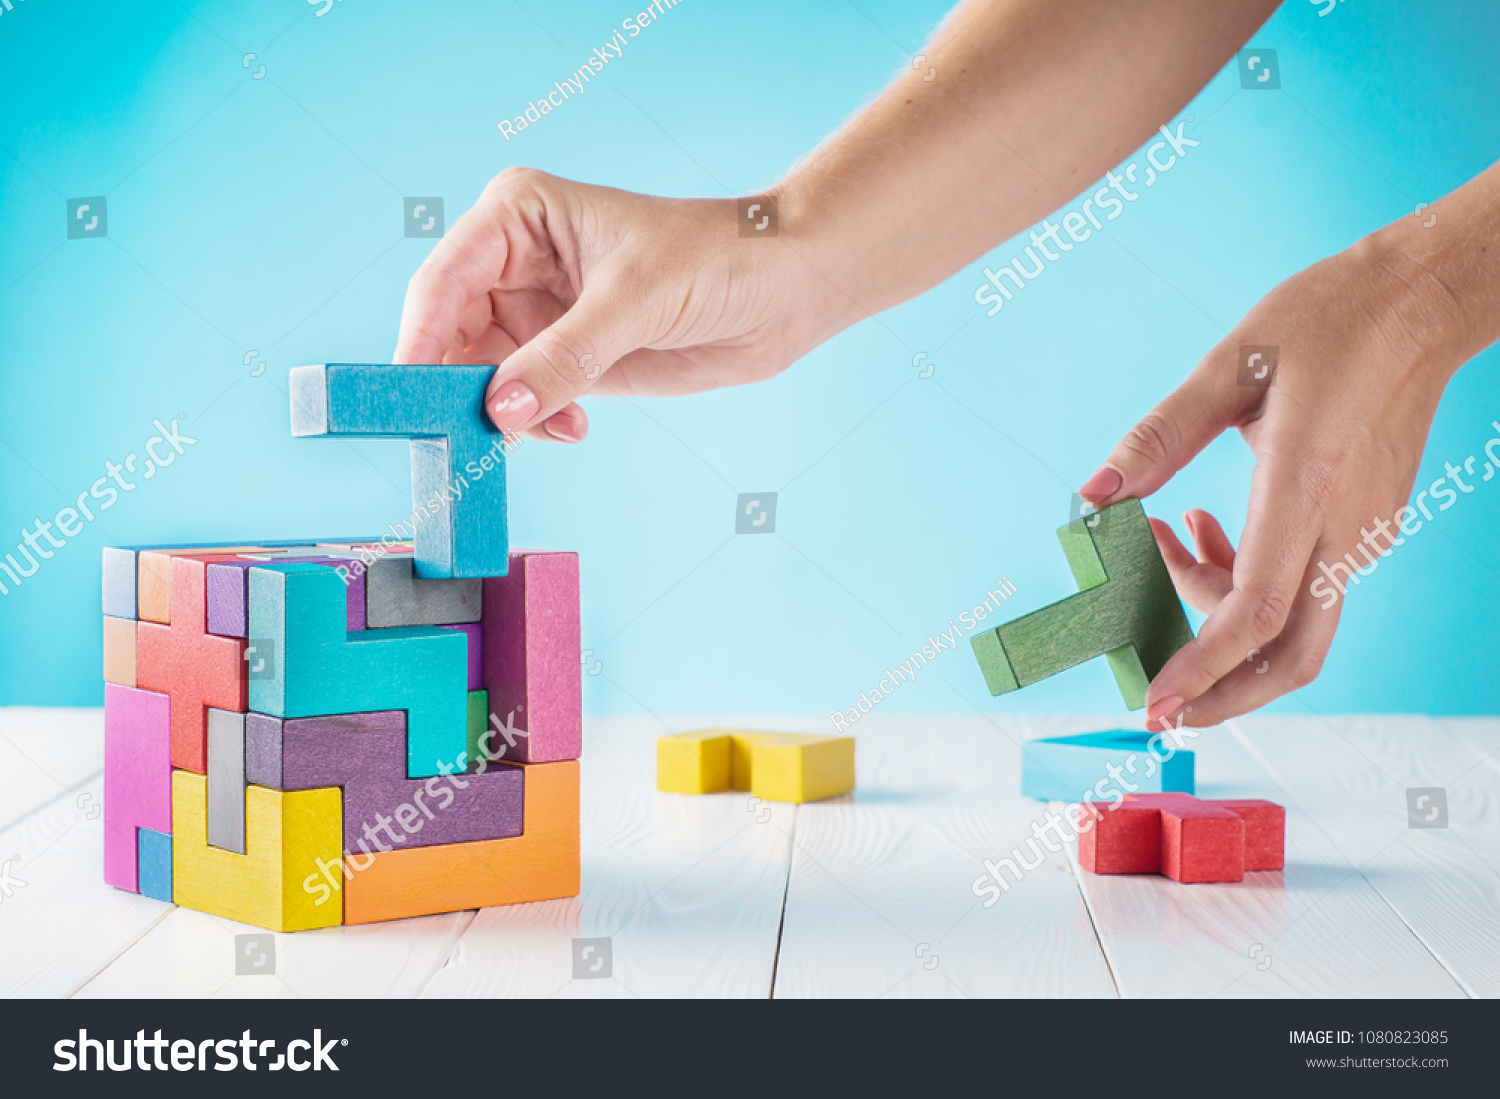 Concept of decision making process, logical thinking. Logical tasks. Conundrum, find the missing piece of the proposed. Hand holding wooden puzzle element. Hand sets the last element of the puzzle.  #1080823085